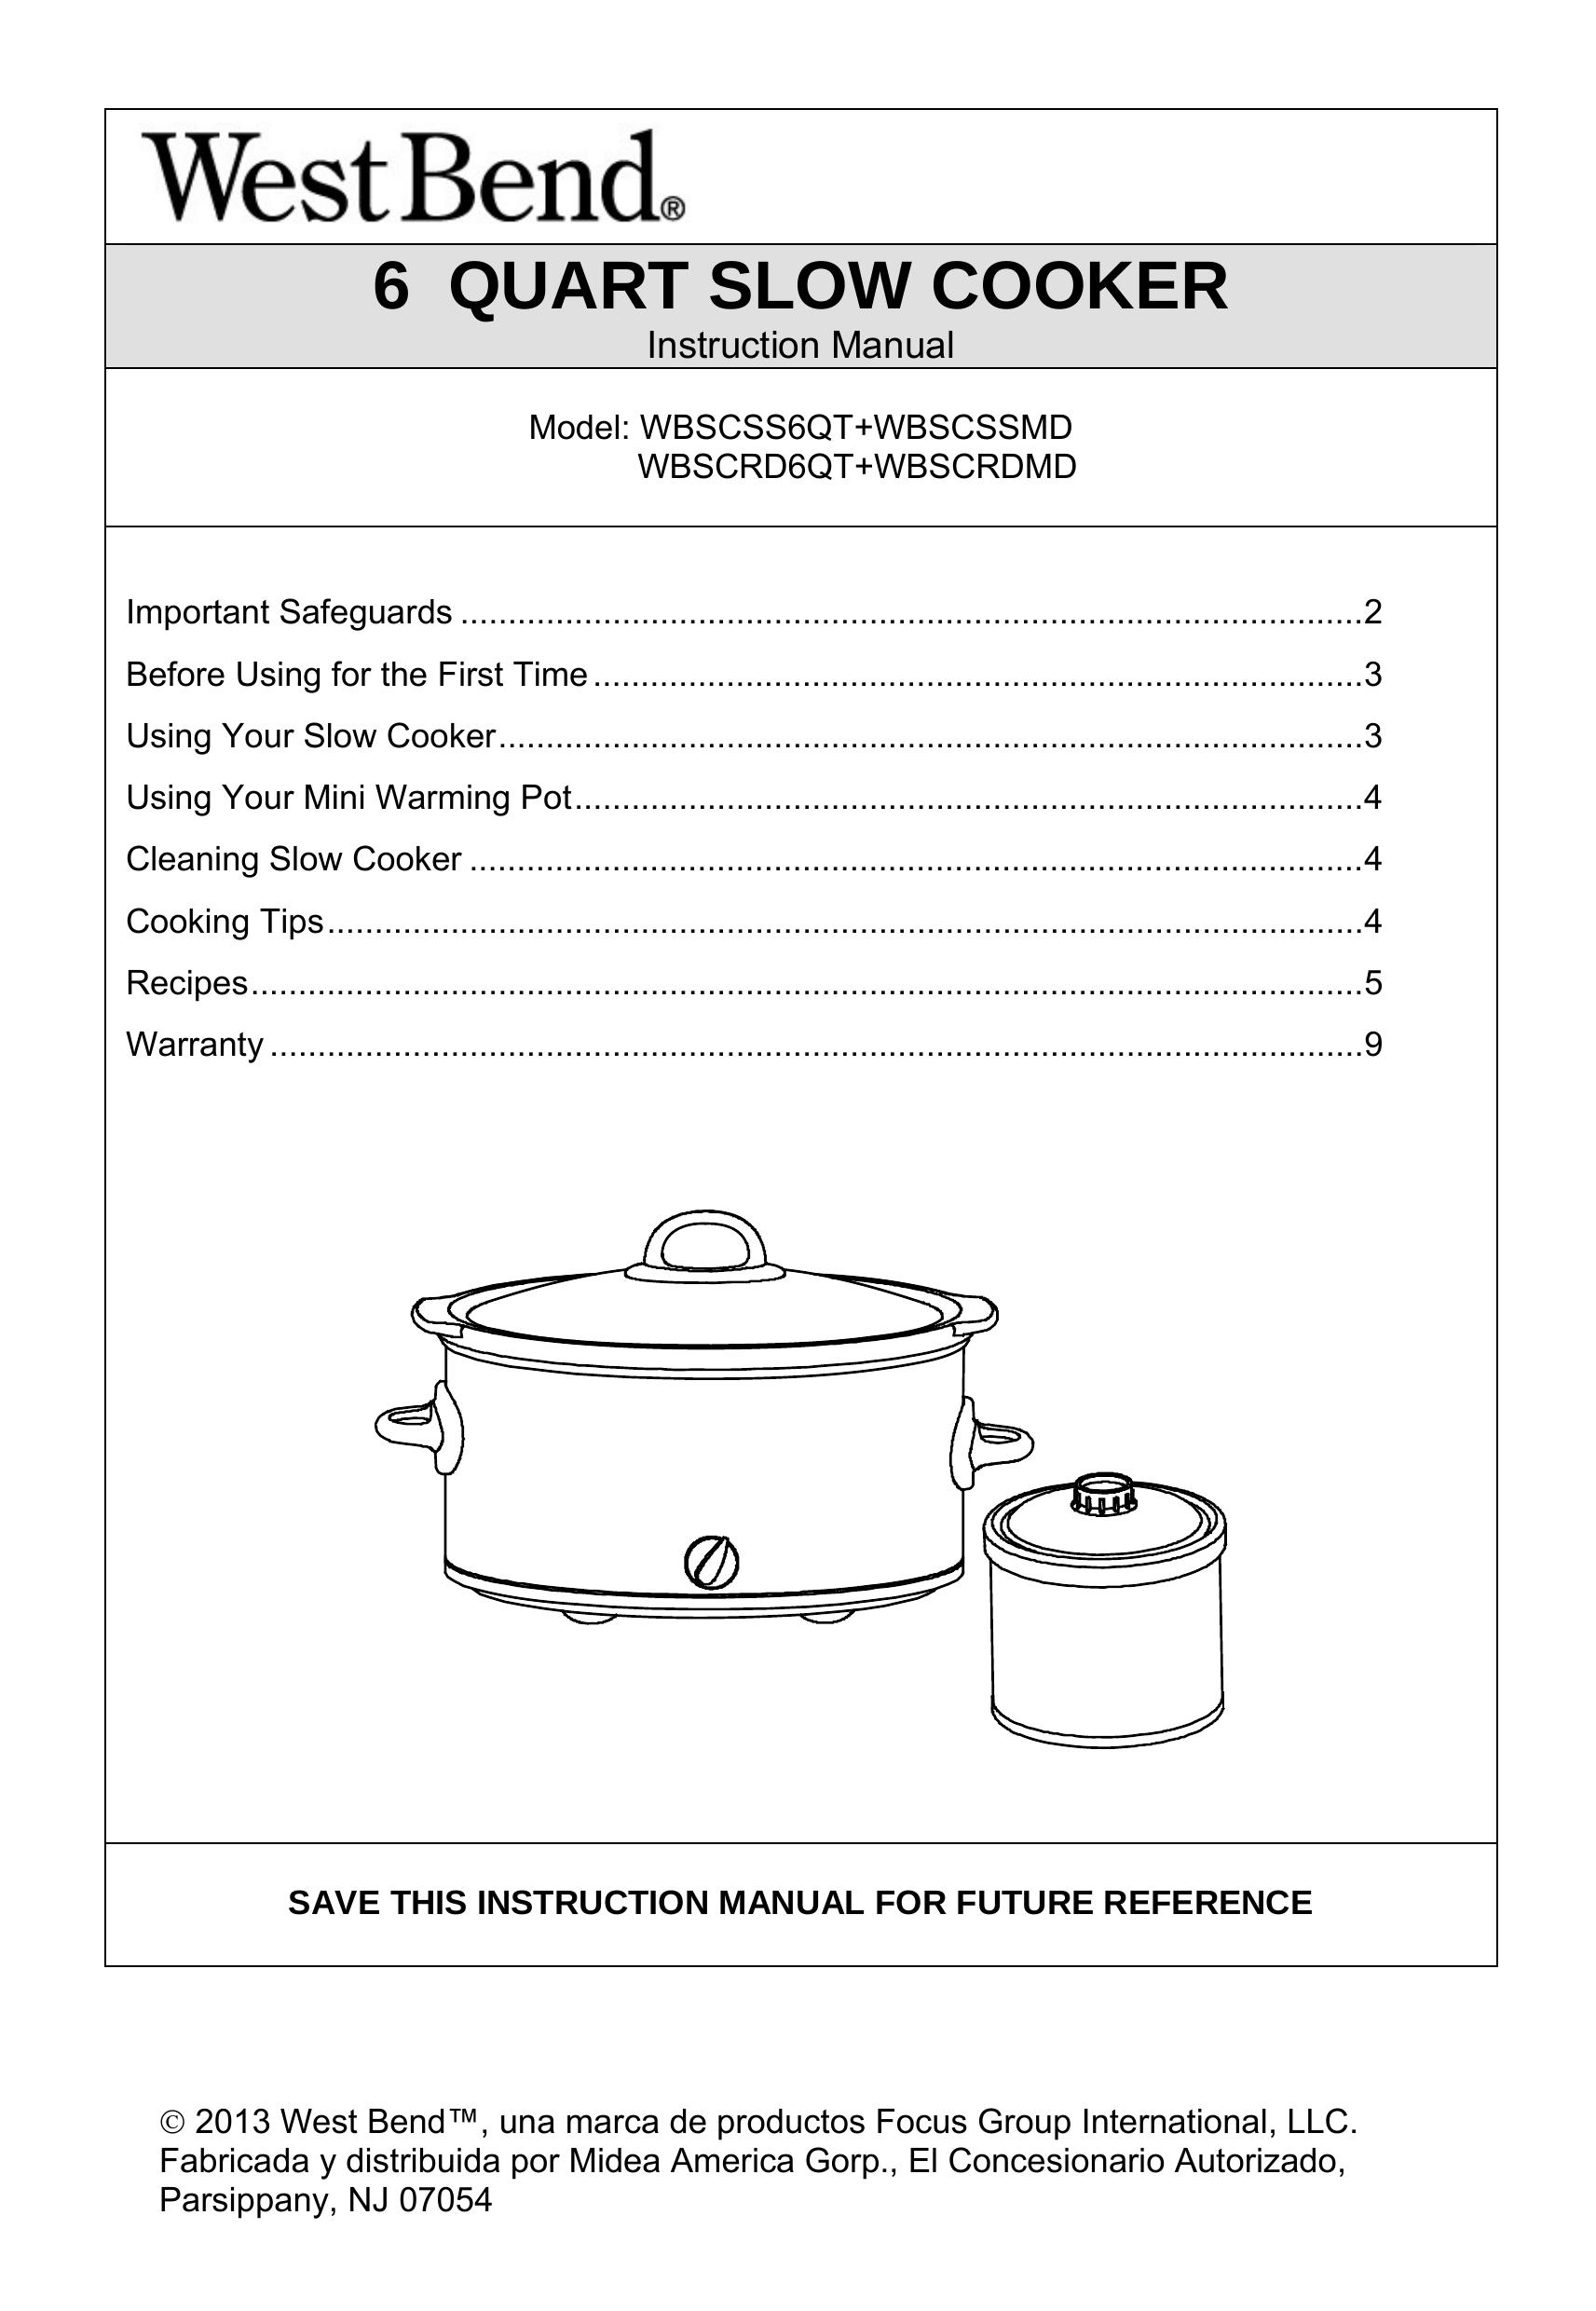 West Bend WBSCSS6QT Slow Cooker User Manual